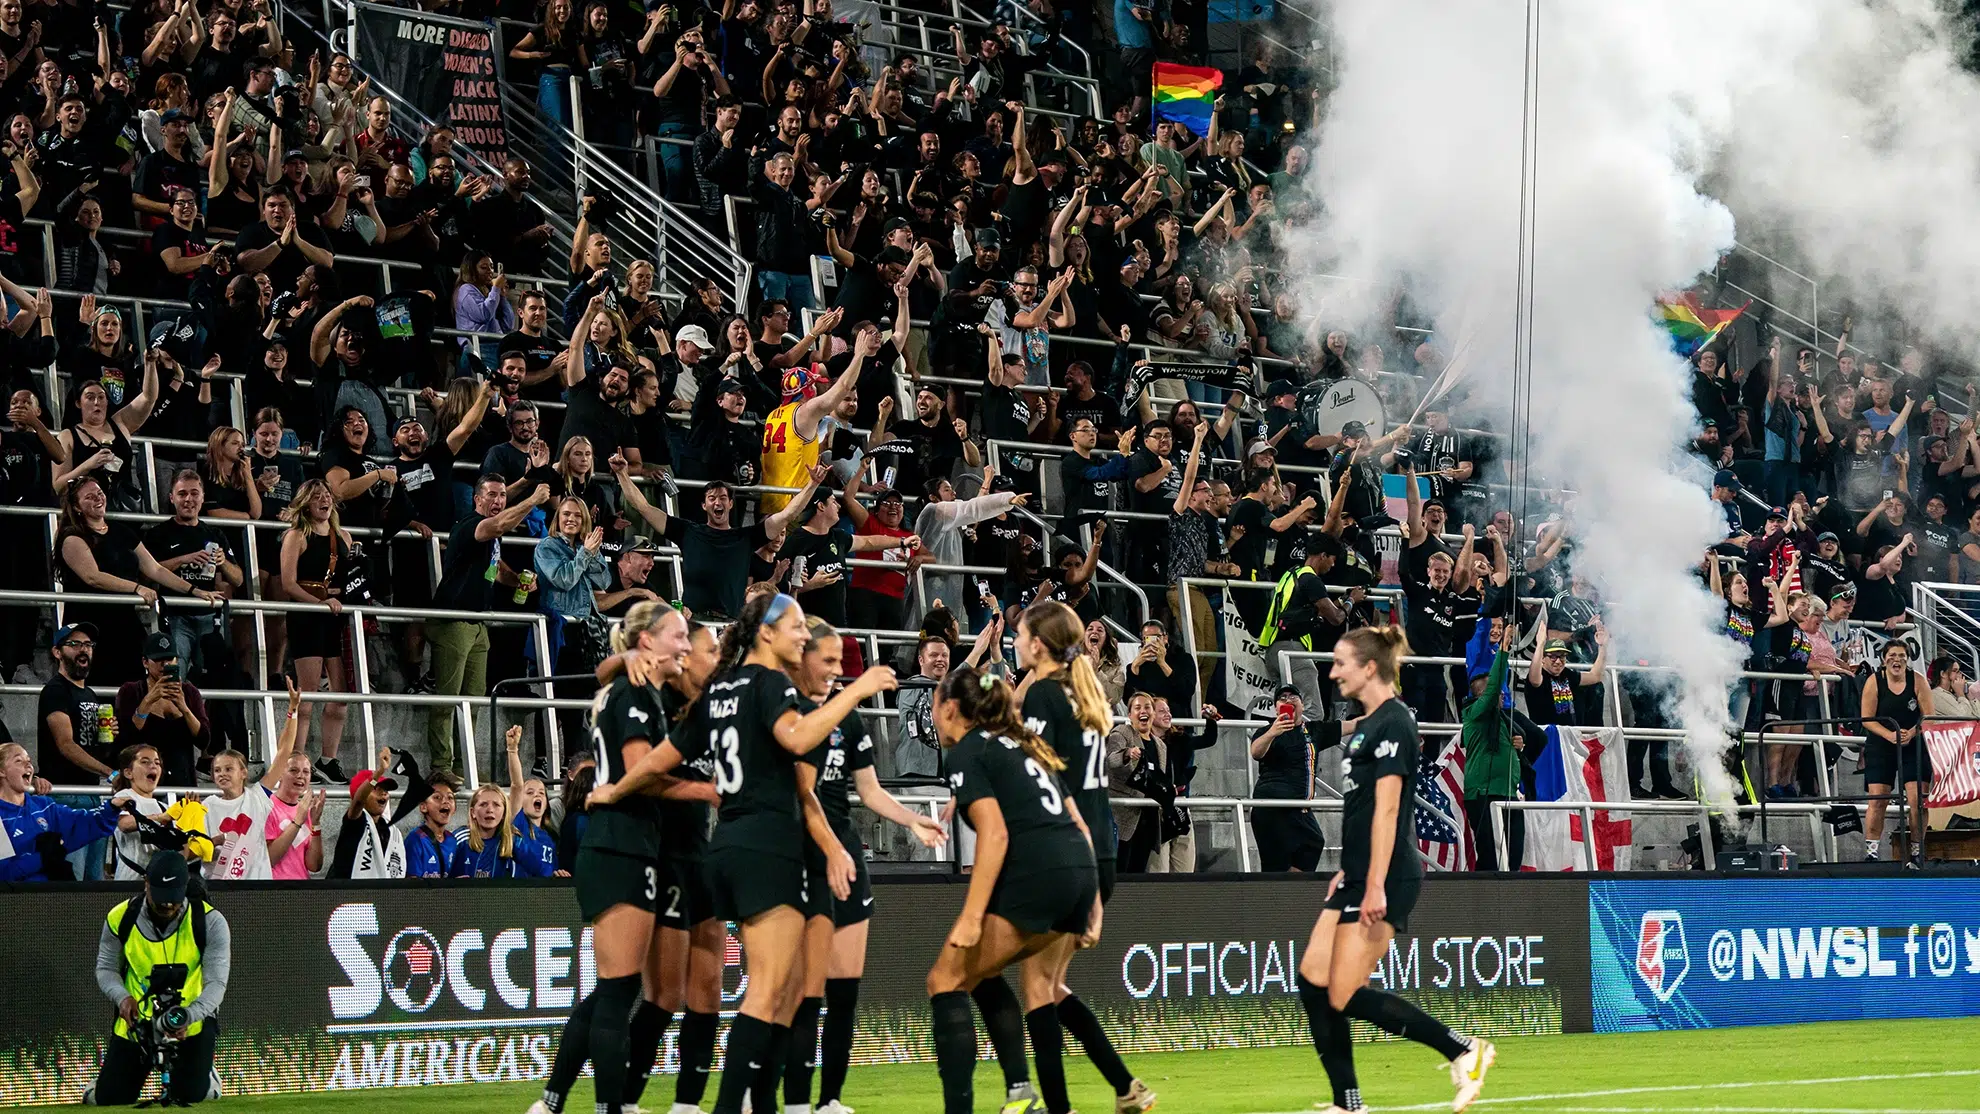 In the foreground, Spirit players wearing black celebrate. In the background, supporters in the stands raise their hands, yell and release smoke in celebration.